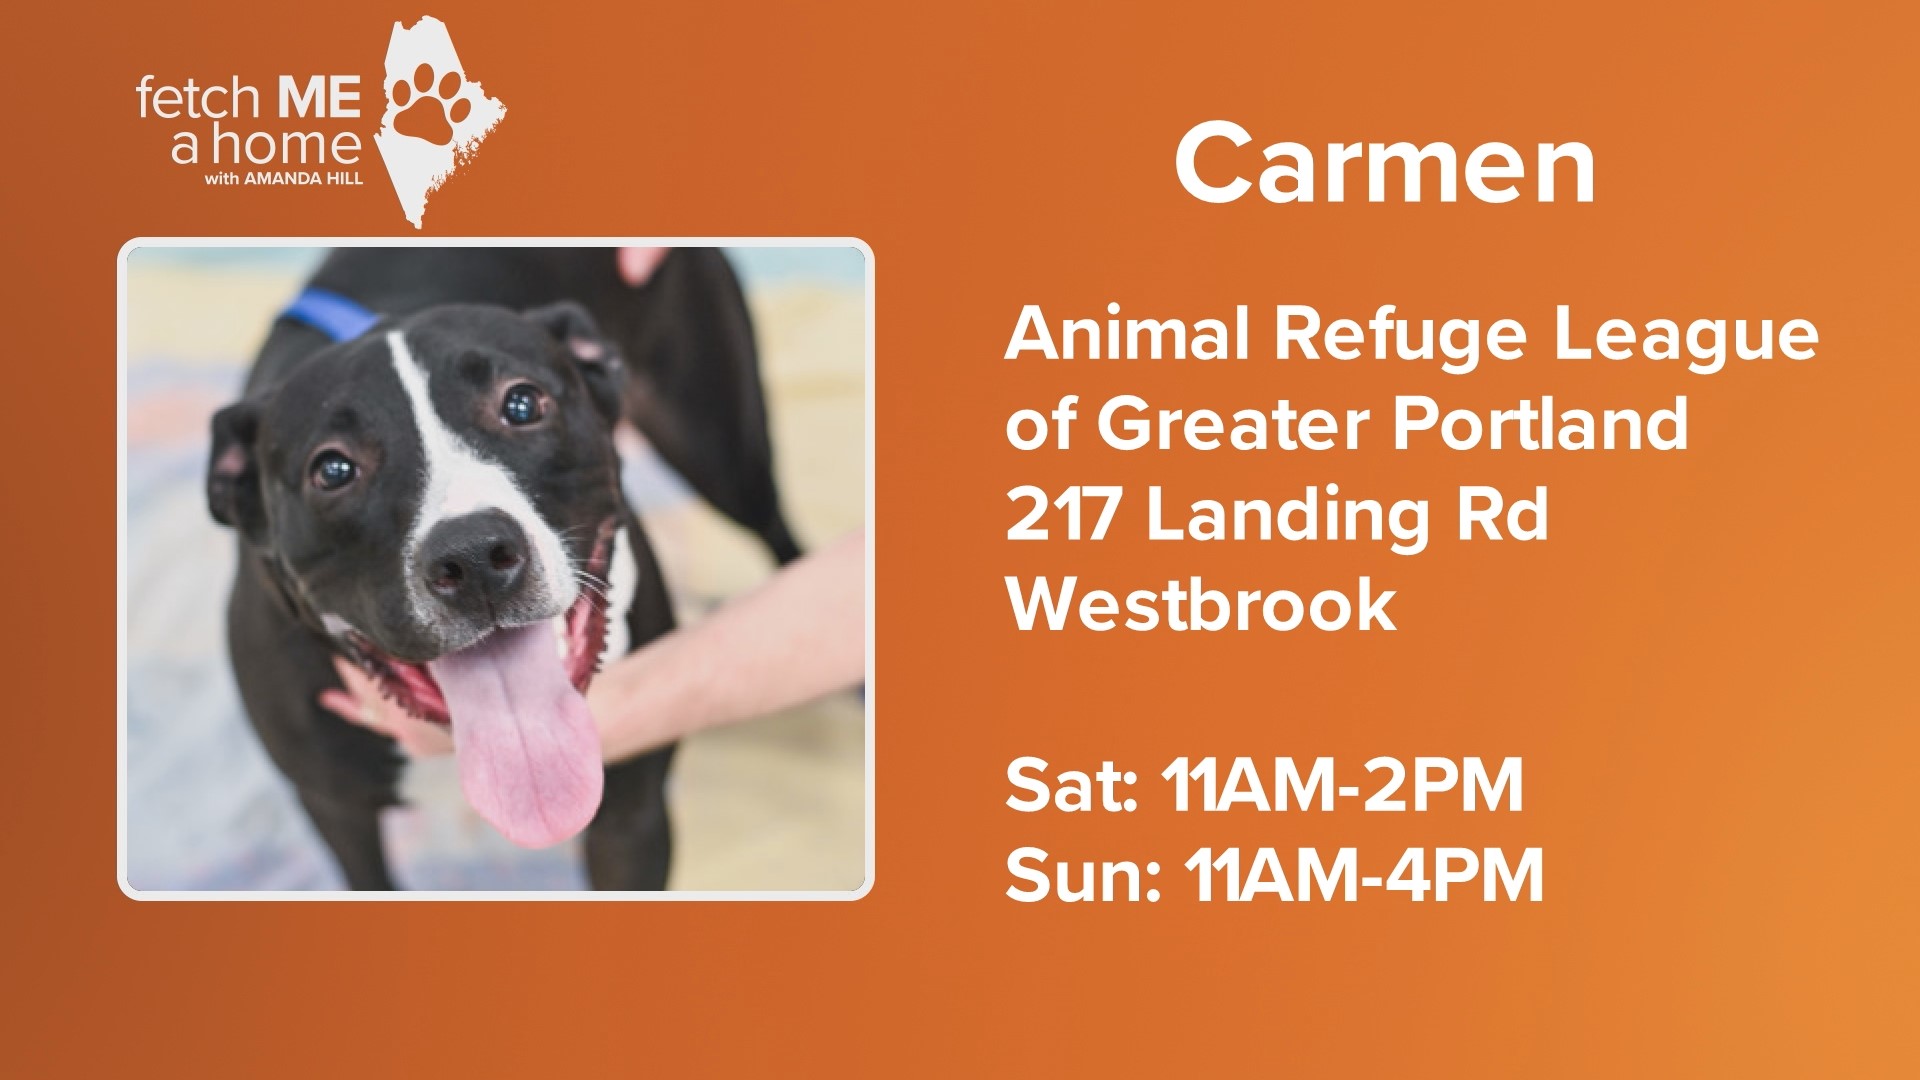 Carmen is available for adoption at the Animal Refuge League of Greater Portland